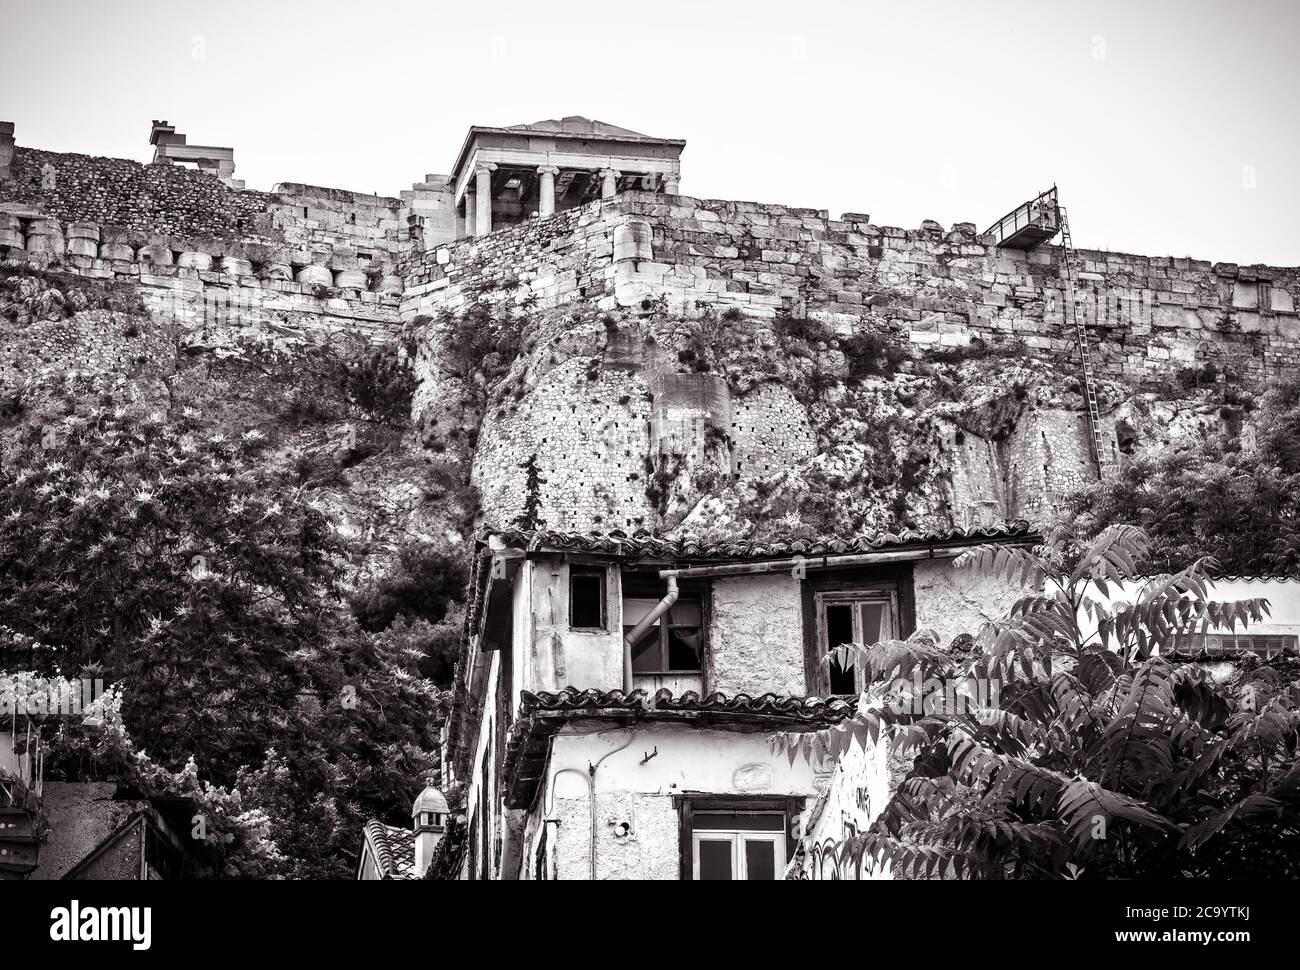 Acropolis of Athens and old houses in Plaka district, Greece. Famous hill with classical Greek ruins is top landmark of Athens. Vintage view of ancien Stock Photo